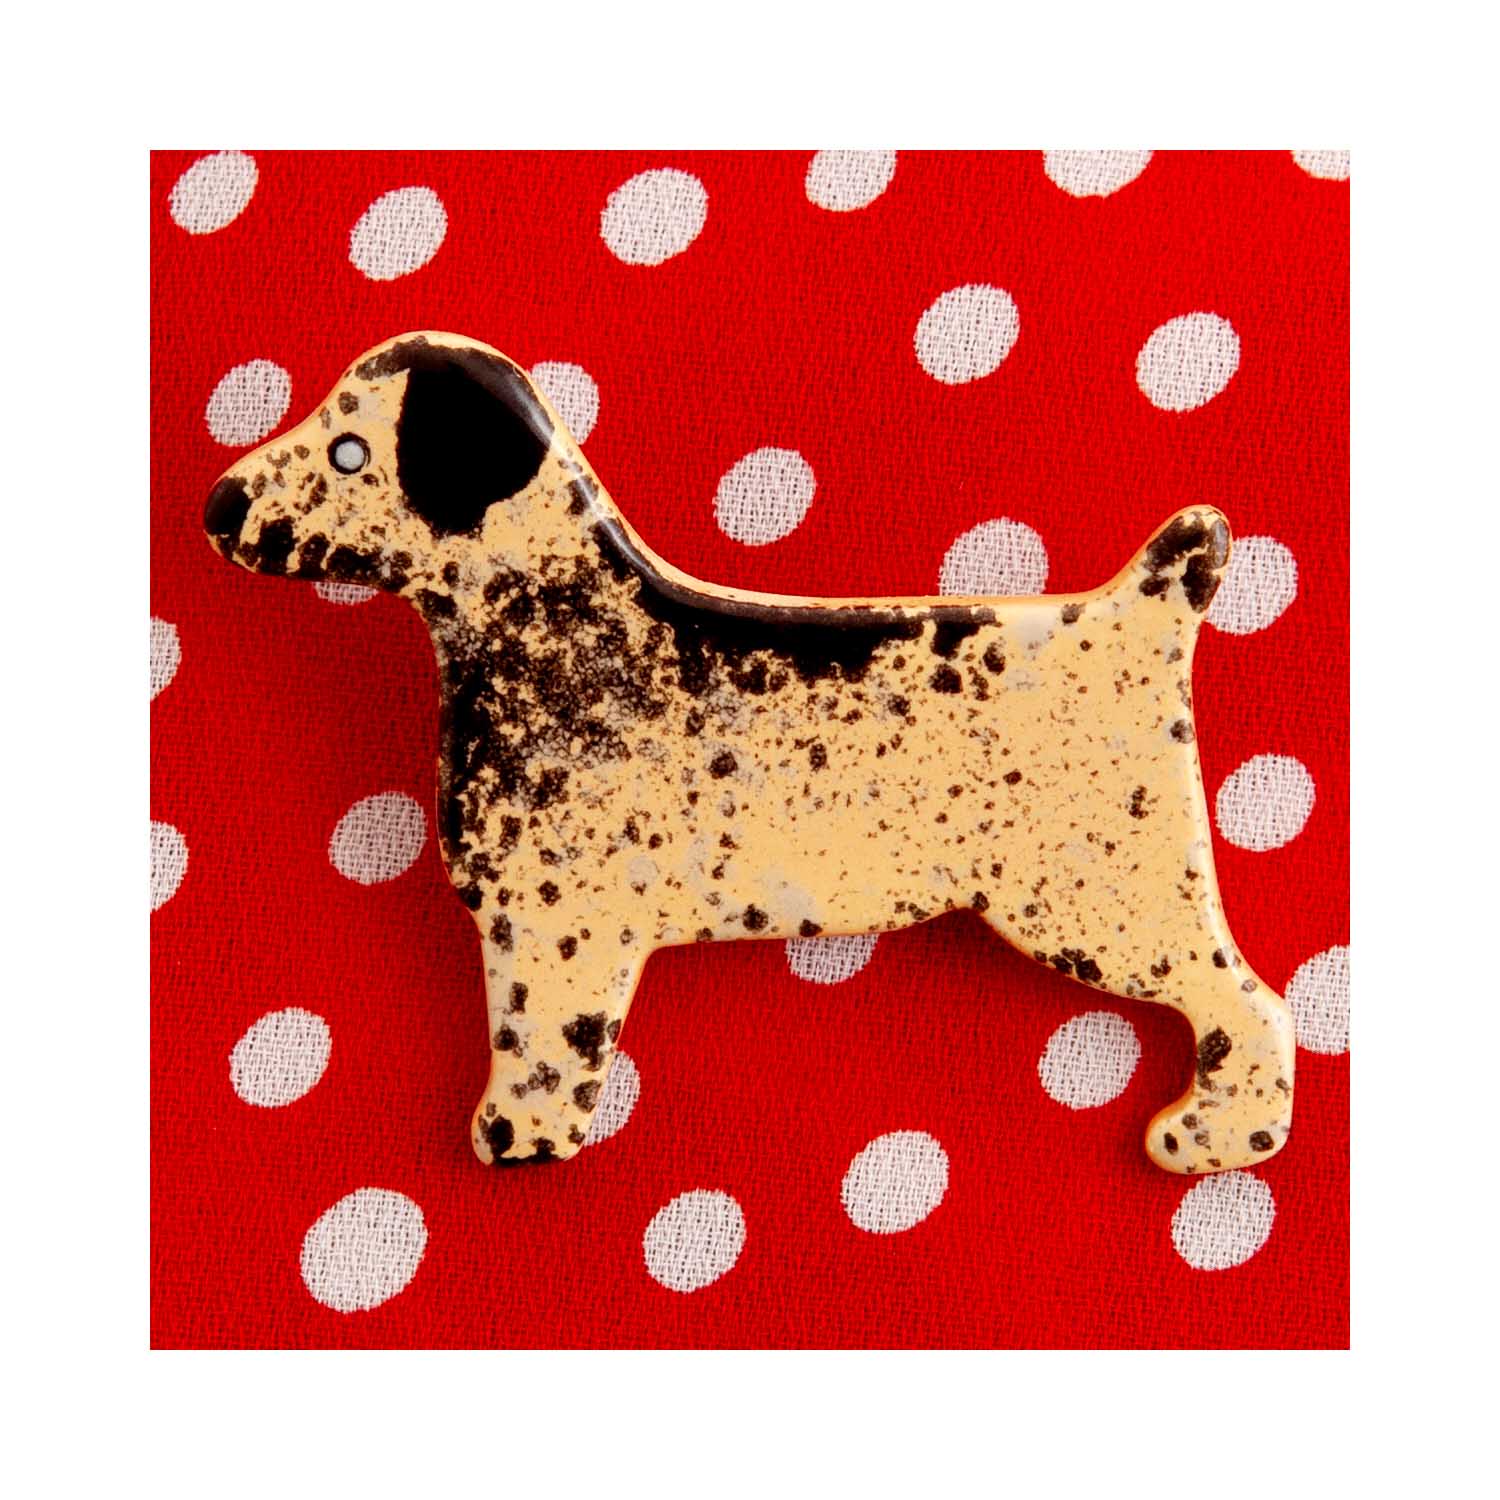 Dog Lover Gifts available at Dog Krazy Gifts – Ceramic Border Terrier Brooch by Mary Goldberg of Stockwell Ceramics, Just Part Of Our Collection Of Border Terrier Themed Gifts, Available At www.dogkrazygifts.co.uk